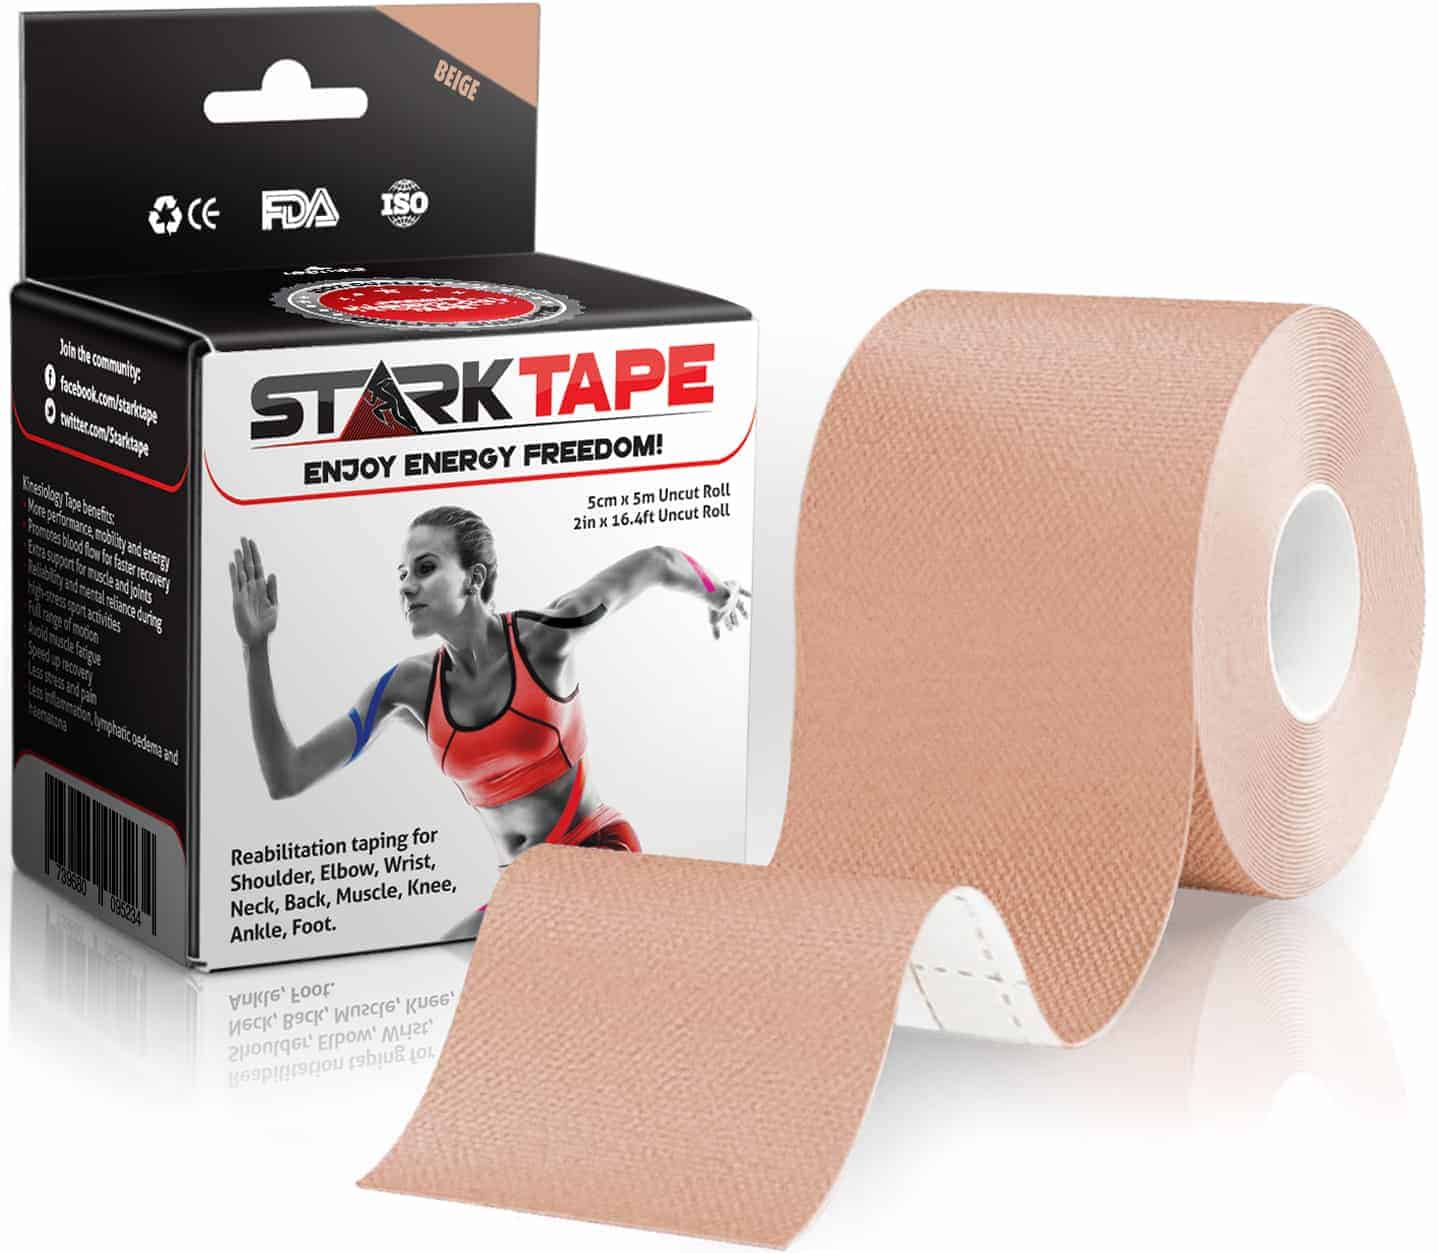 11 Assured sports tape review